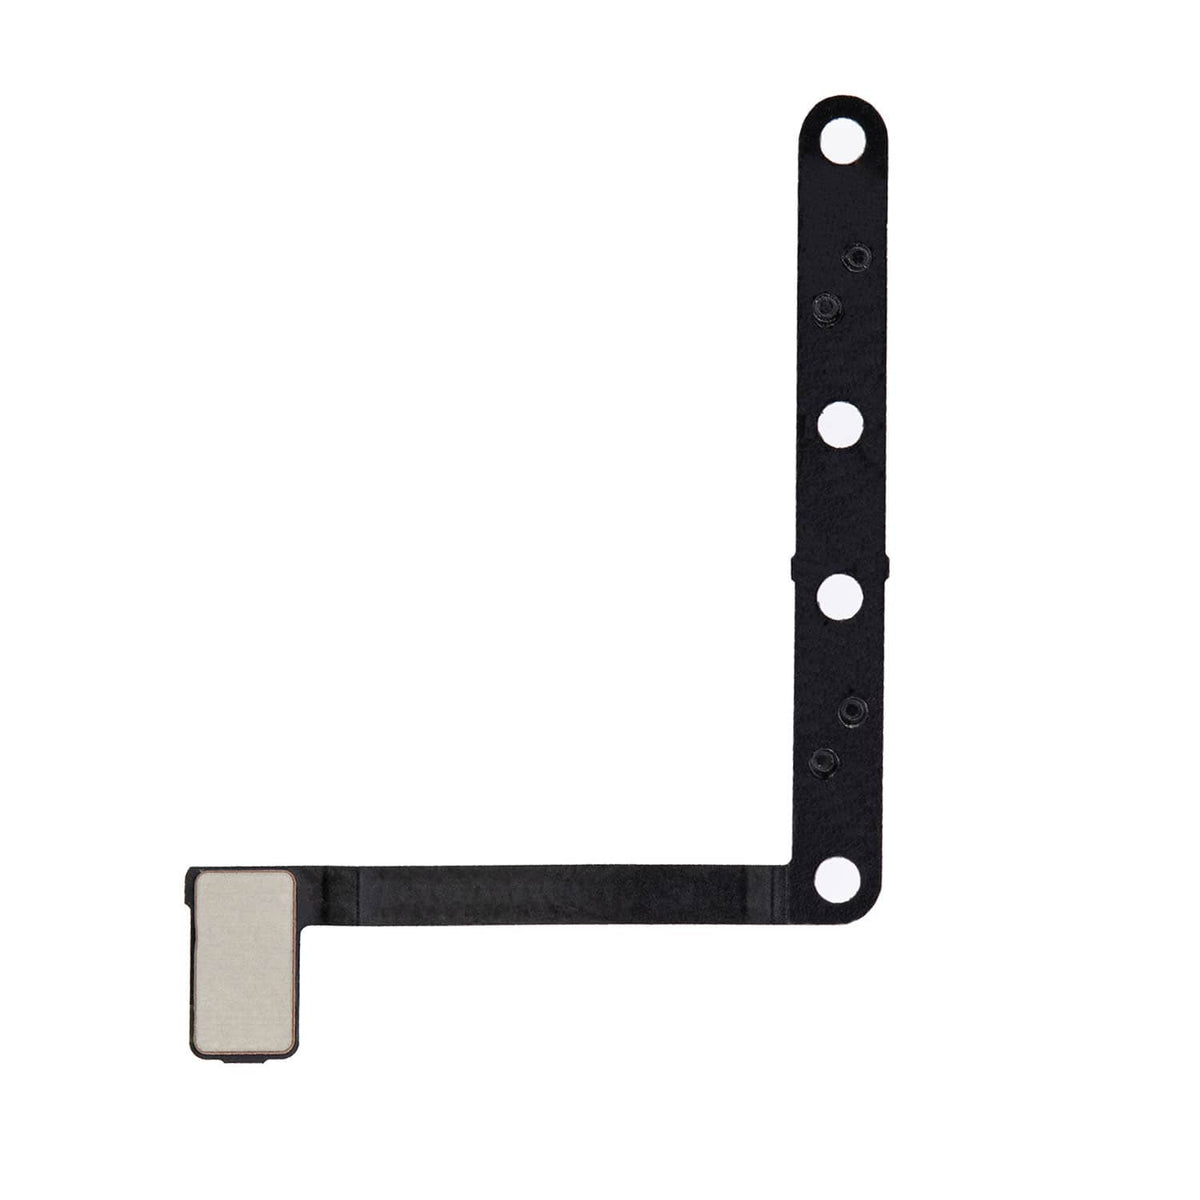 VOLOME BUTTON FLEX CABLE (4G VERSION) FOR IPAD PRO 11(2ND)/12.9(4TH)